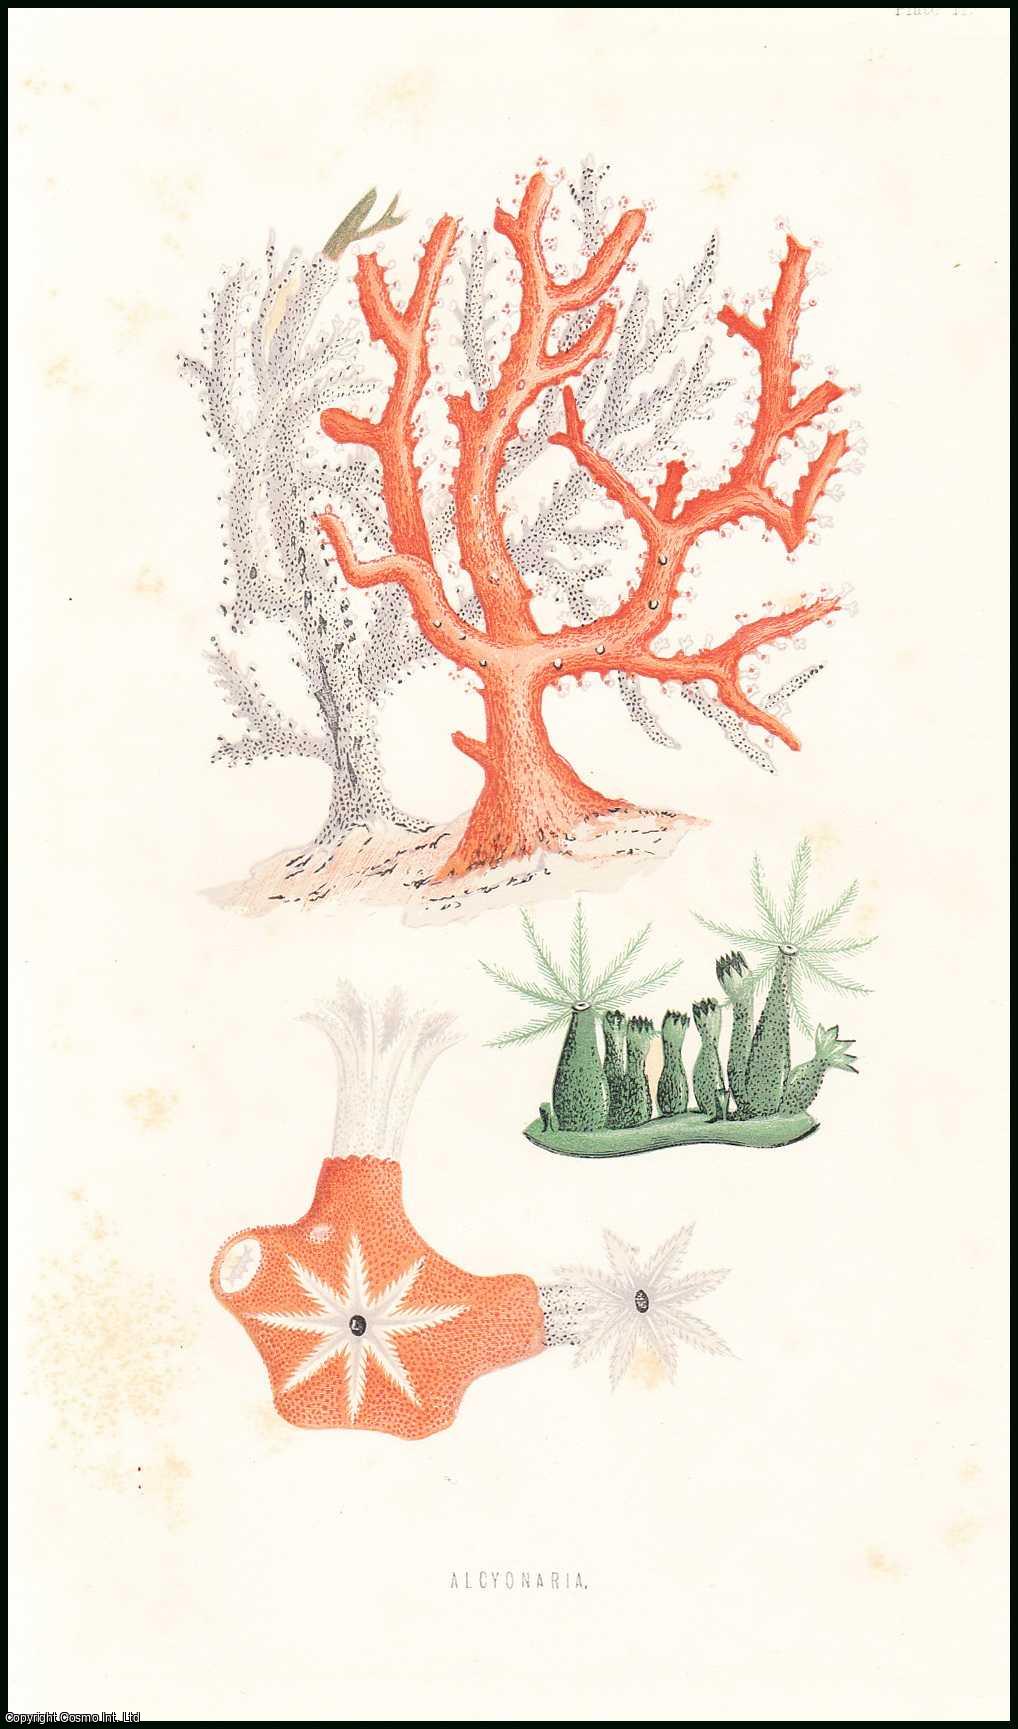 P. Martin Duncan, M.B. Lond., F.R.S. - Corals & their Polypes (part 2). An uncommon original article from the Student and Intellectual Observer of Science Literature & Art, 1869.